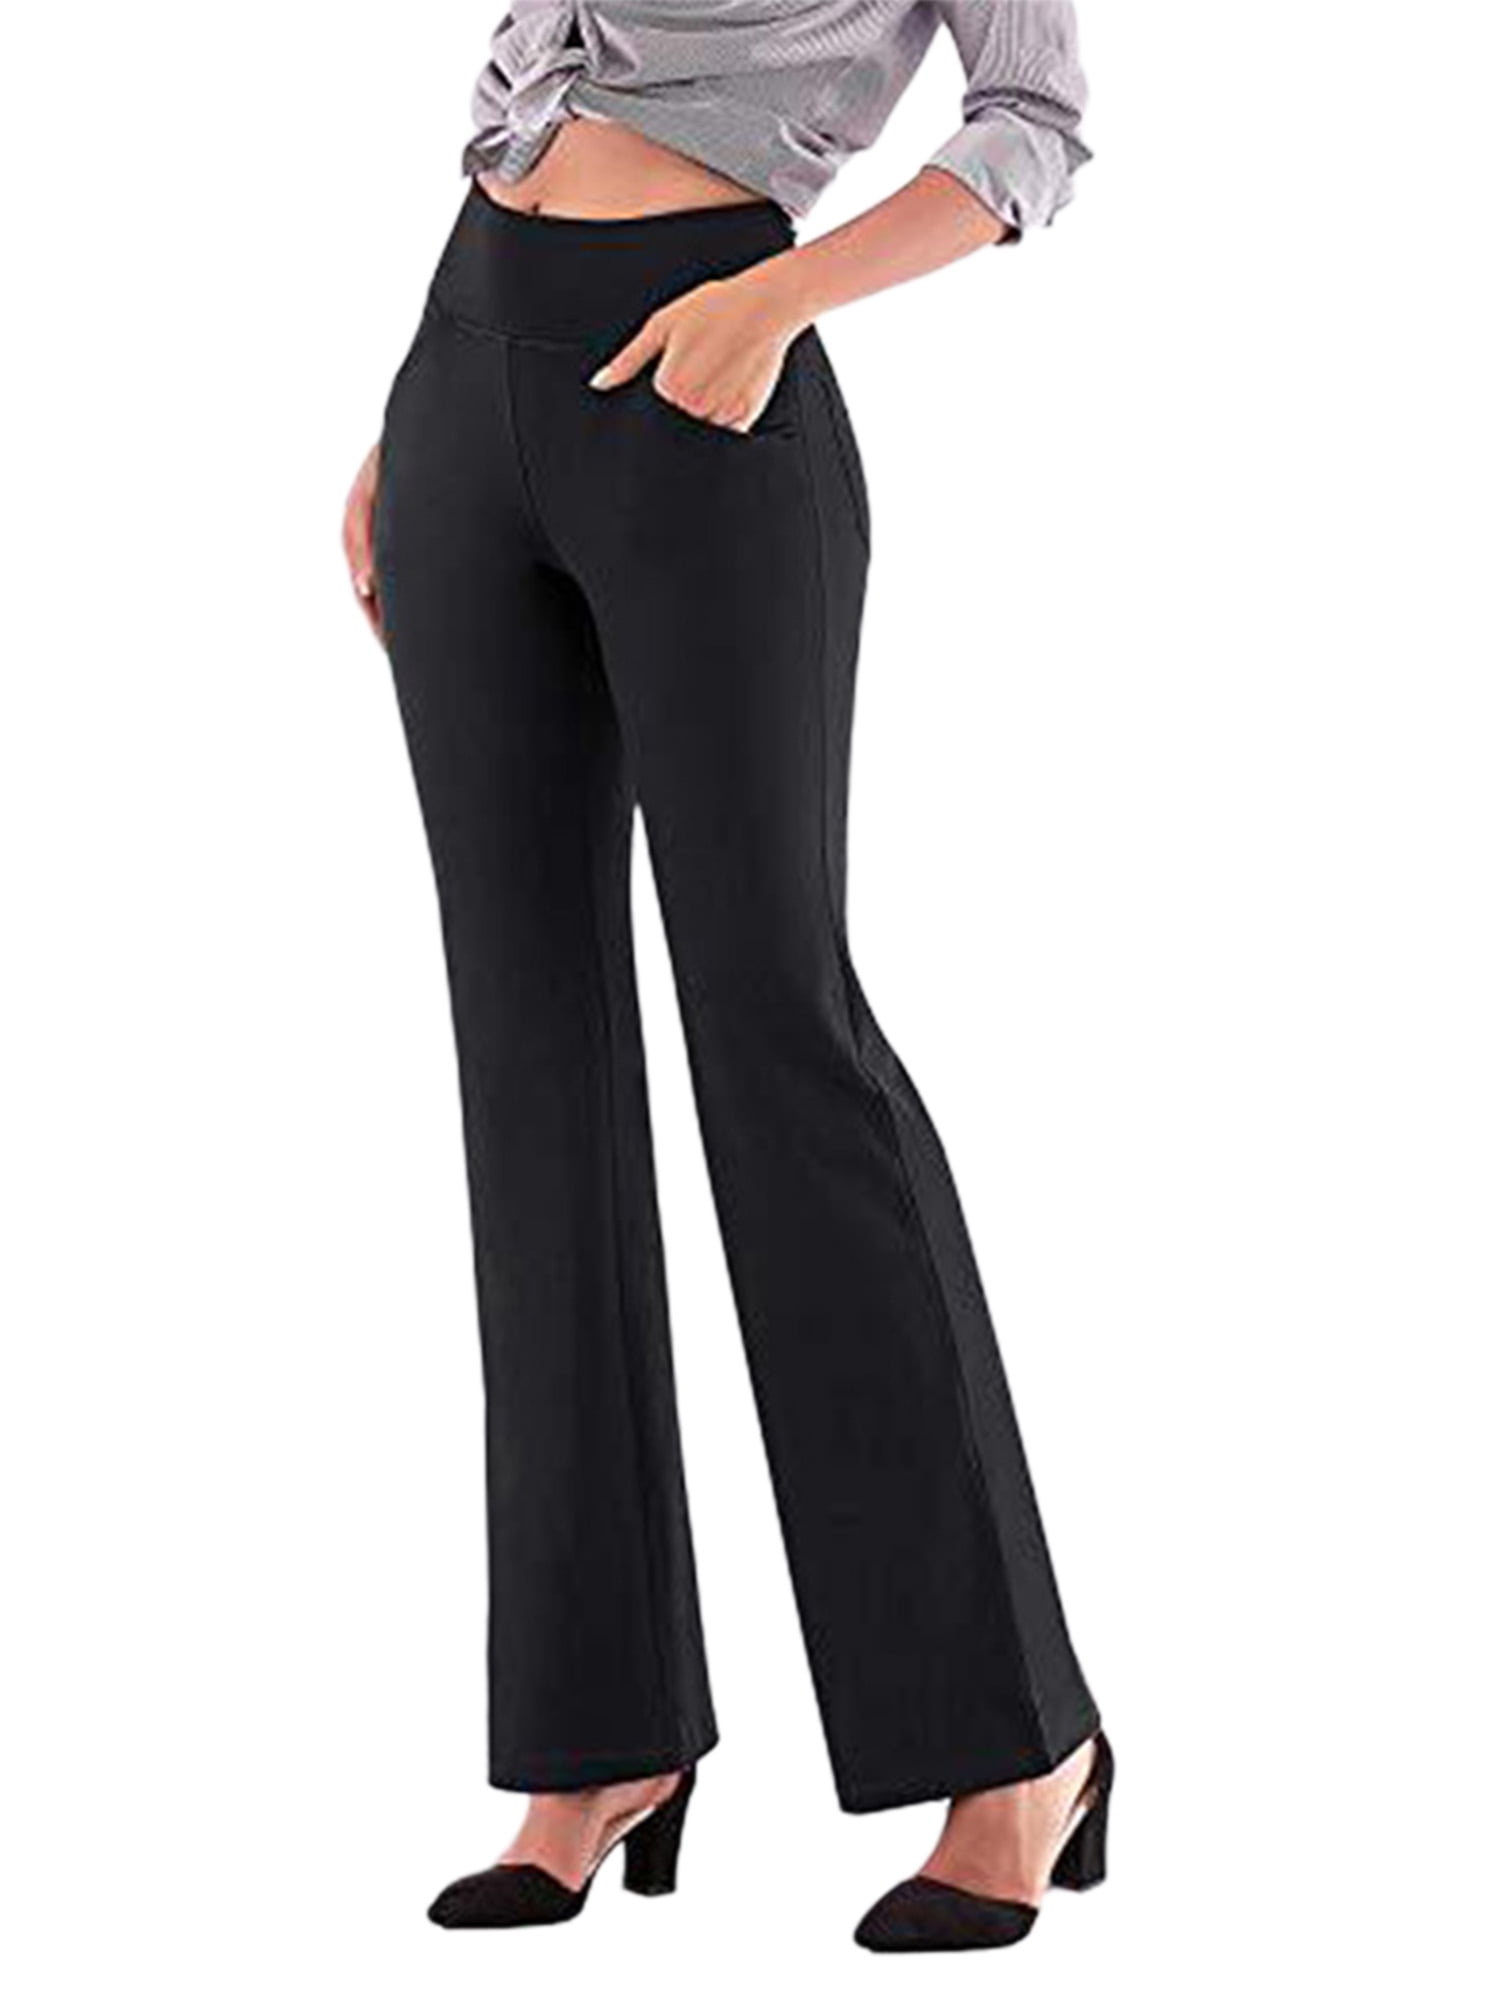 Colisha Bootcut Yoga Pants for Women Stretchy Work Business Slacks Dress  Pants Casual Flare Bottoms Trousers with Pocket 